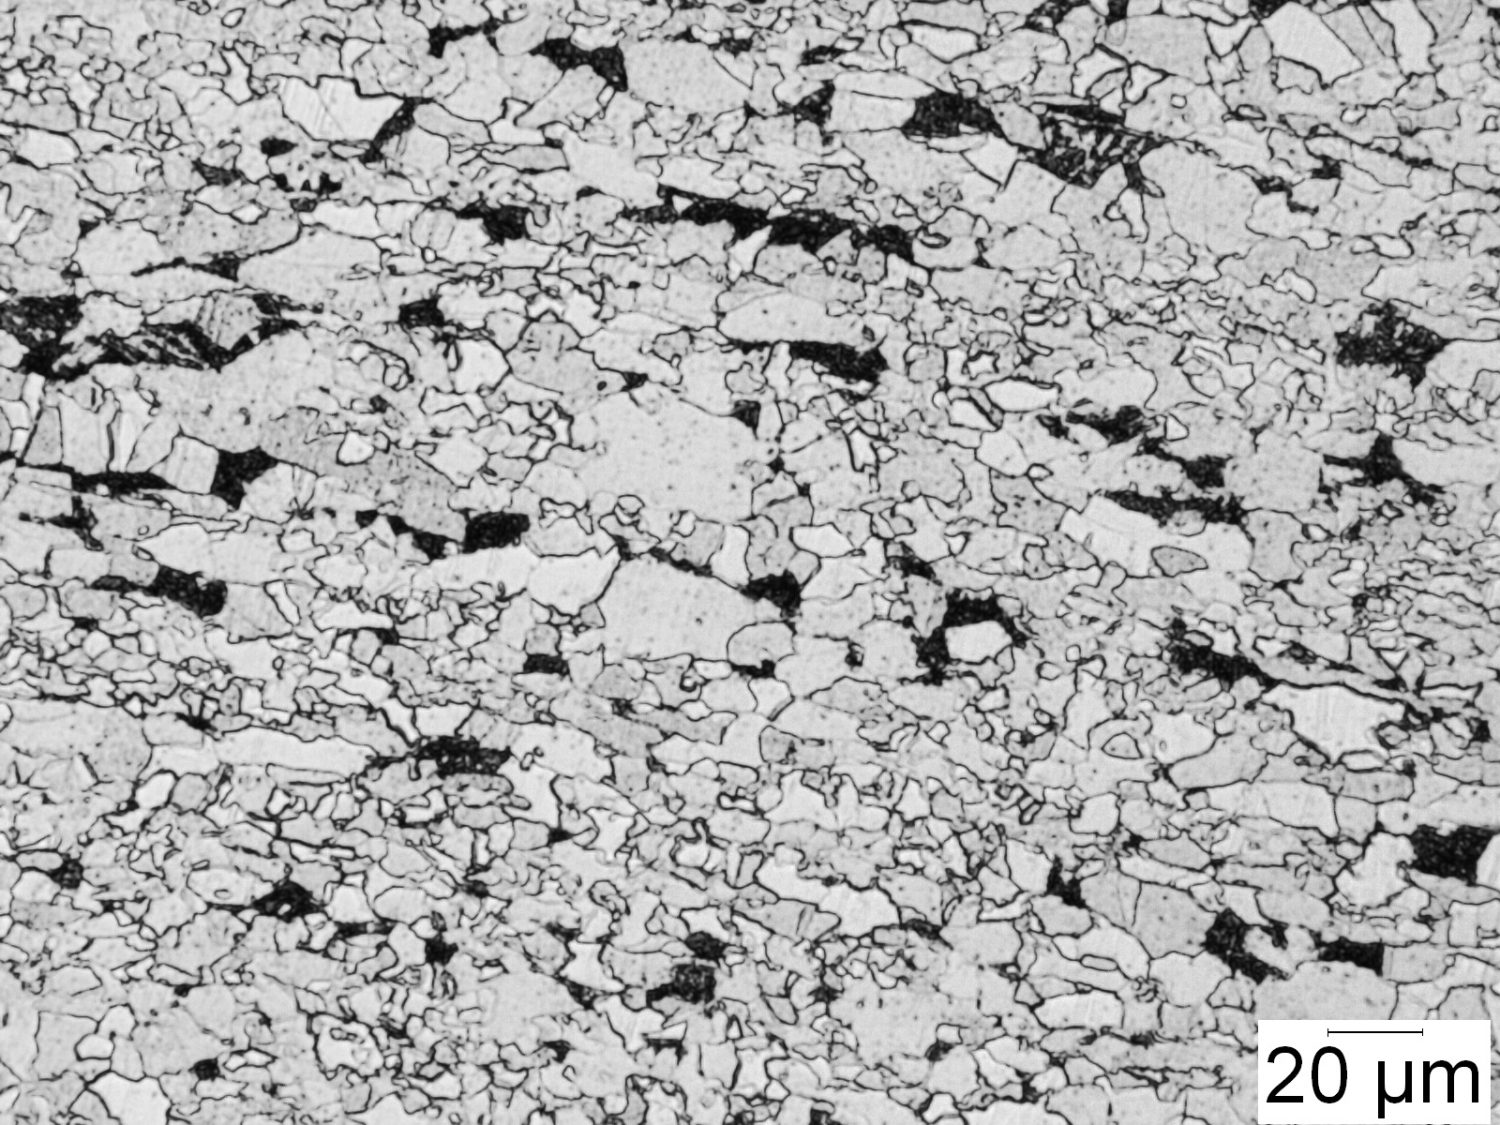 metallography-for-analysis-of-metal-microstructures